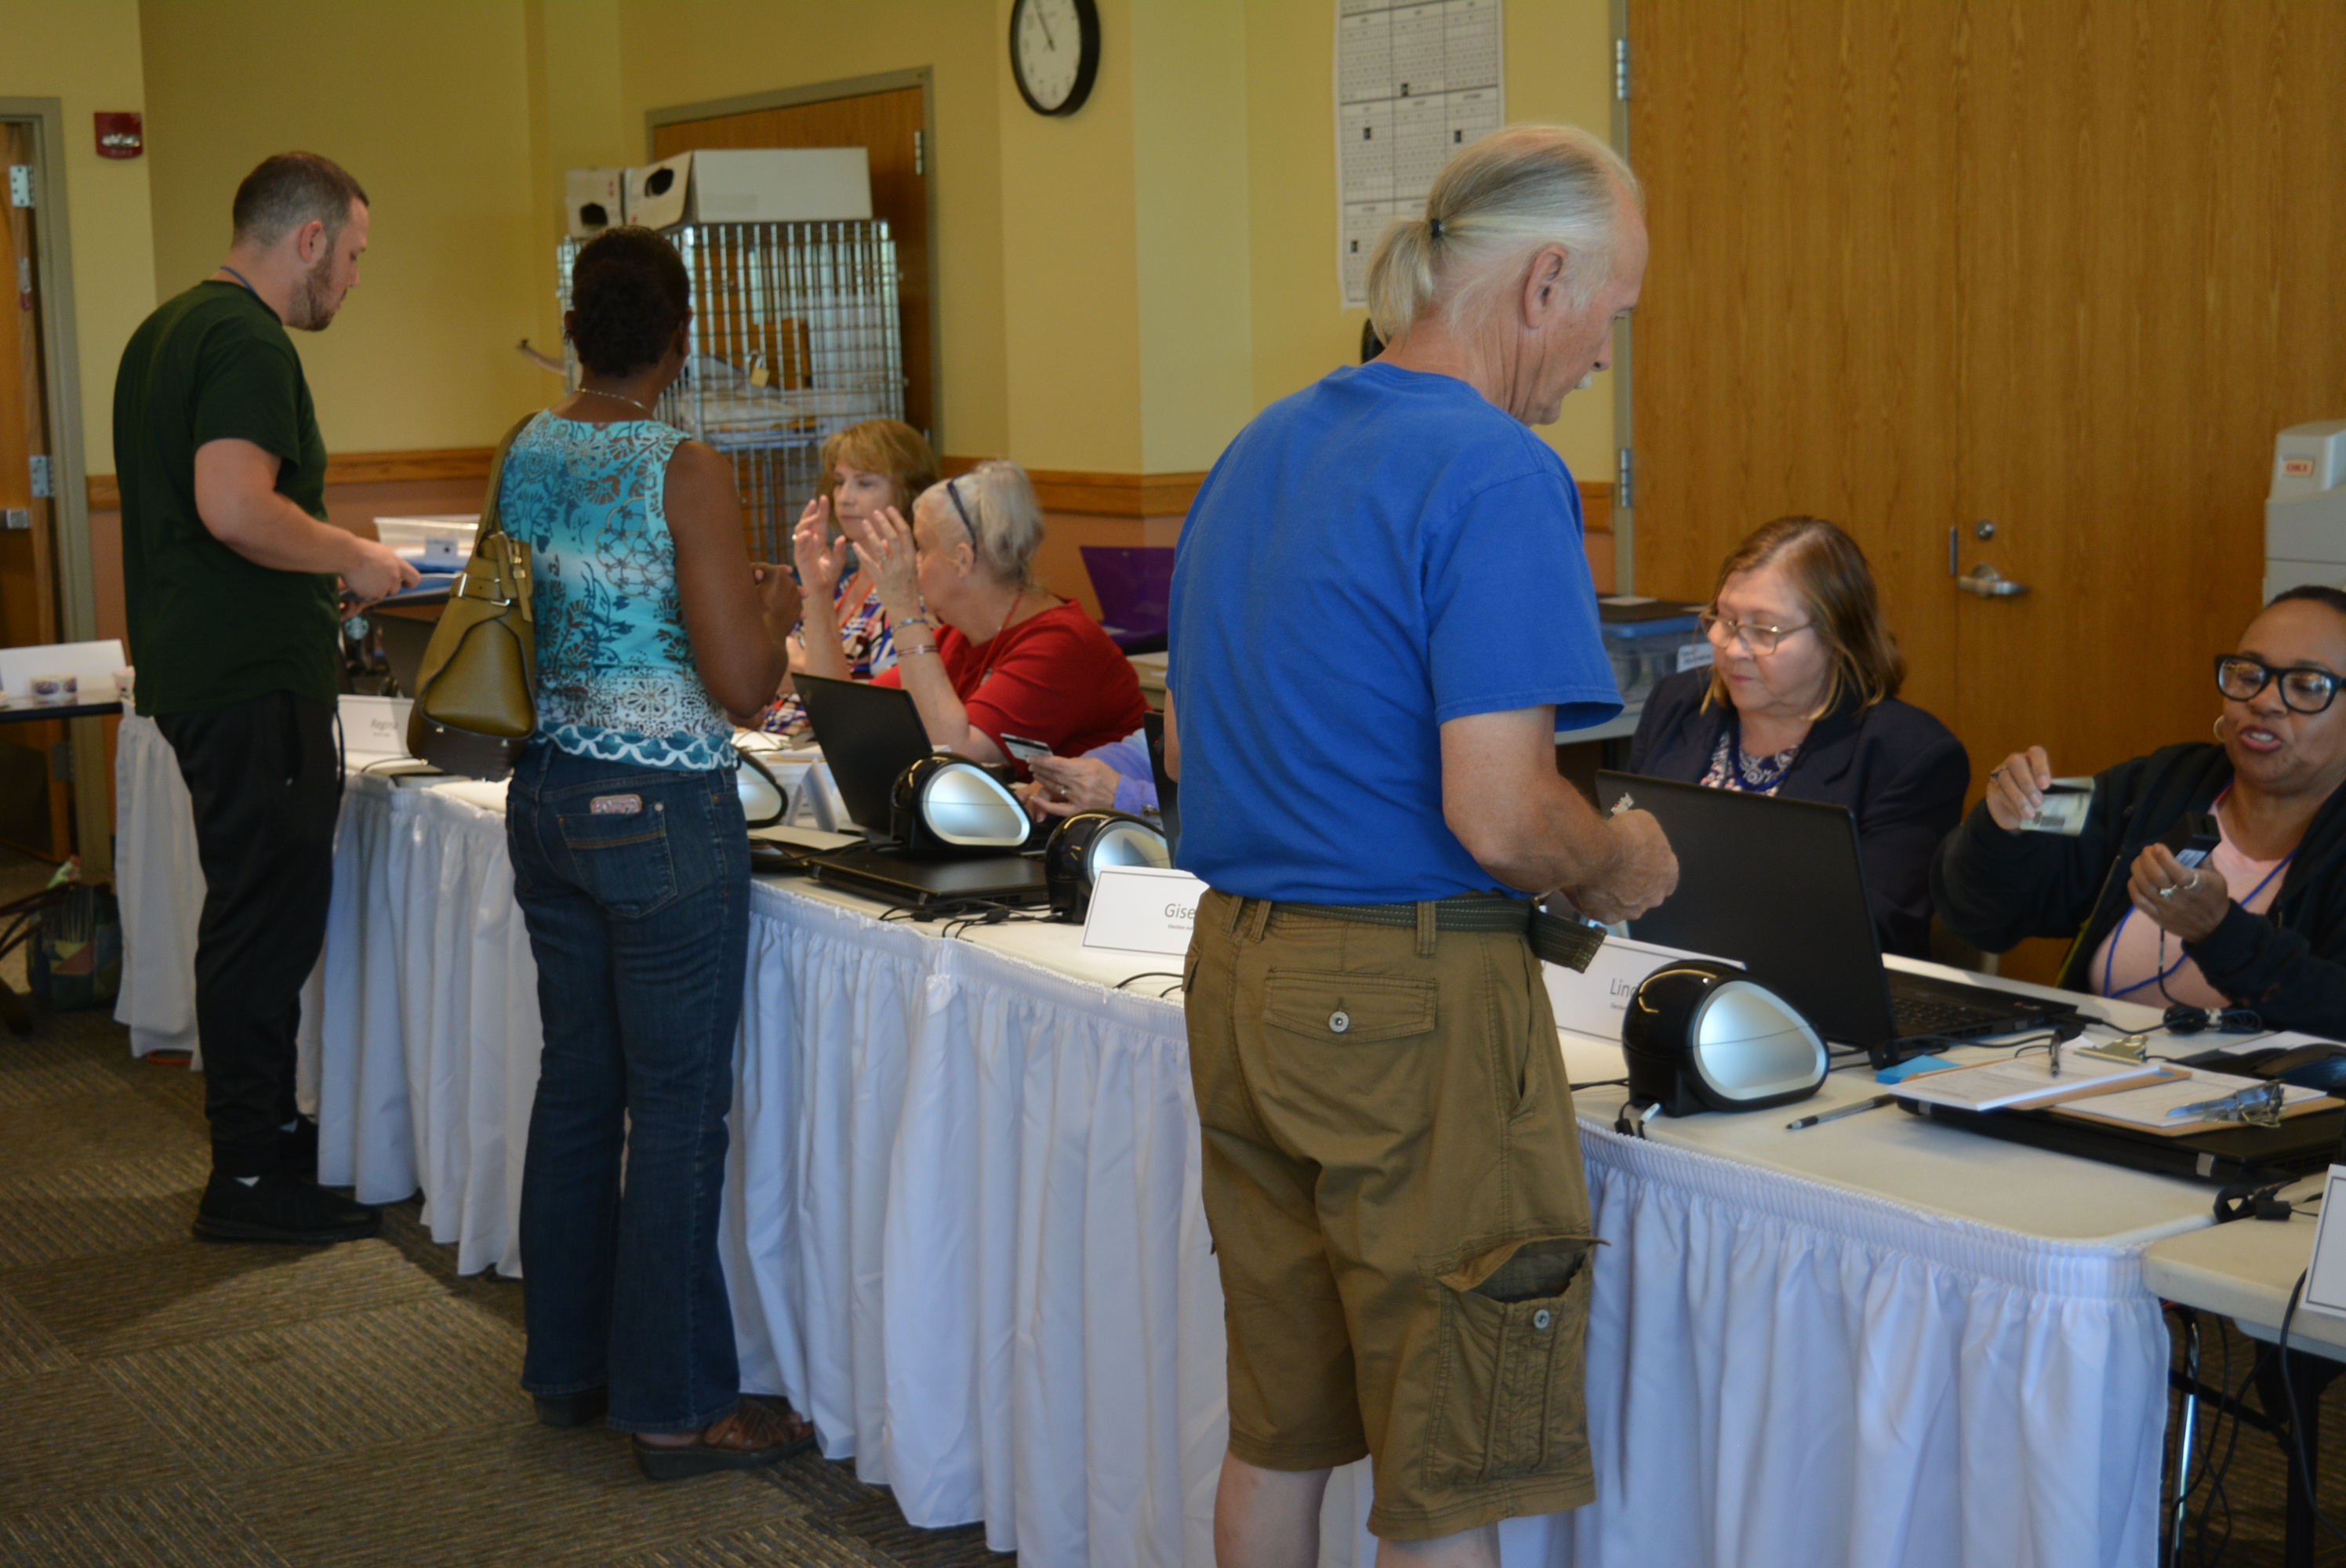 Voters check in at table at Voter Service and Polling Center